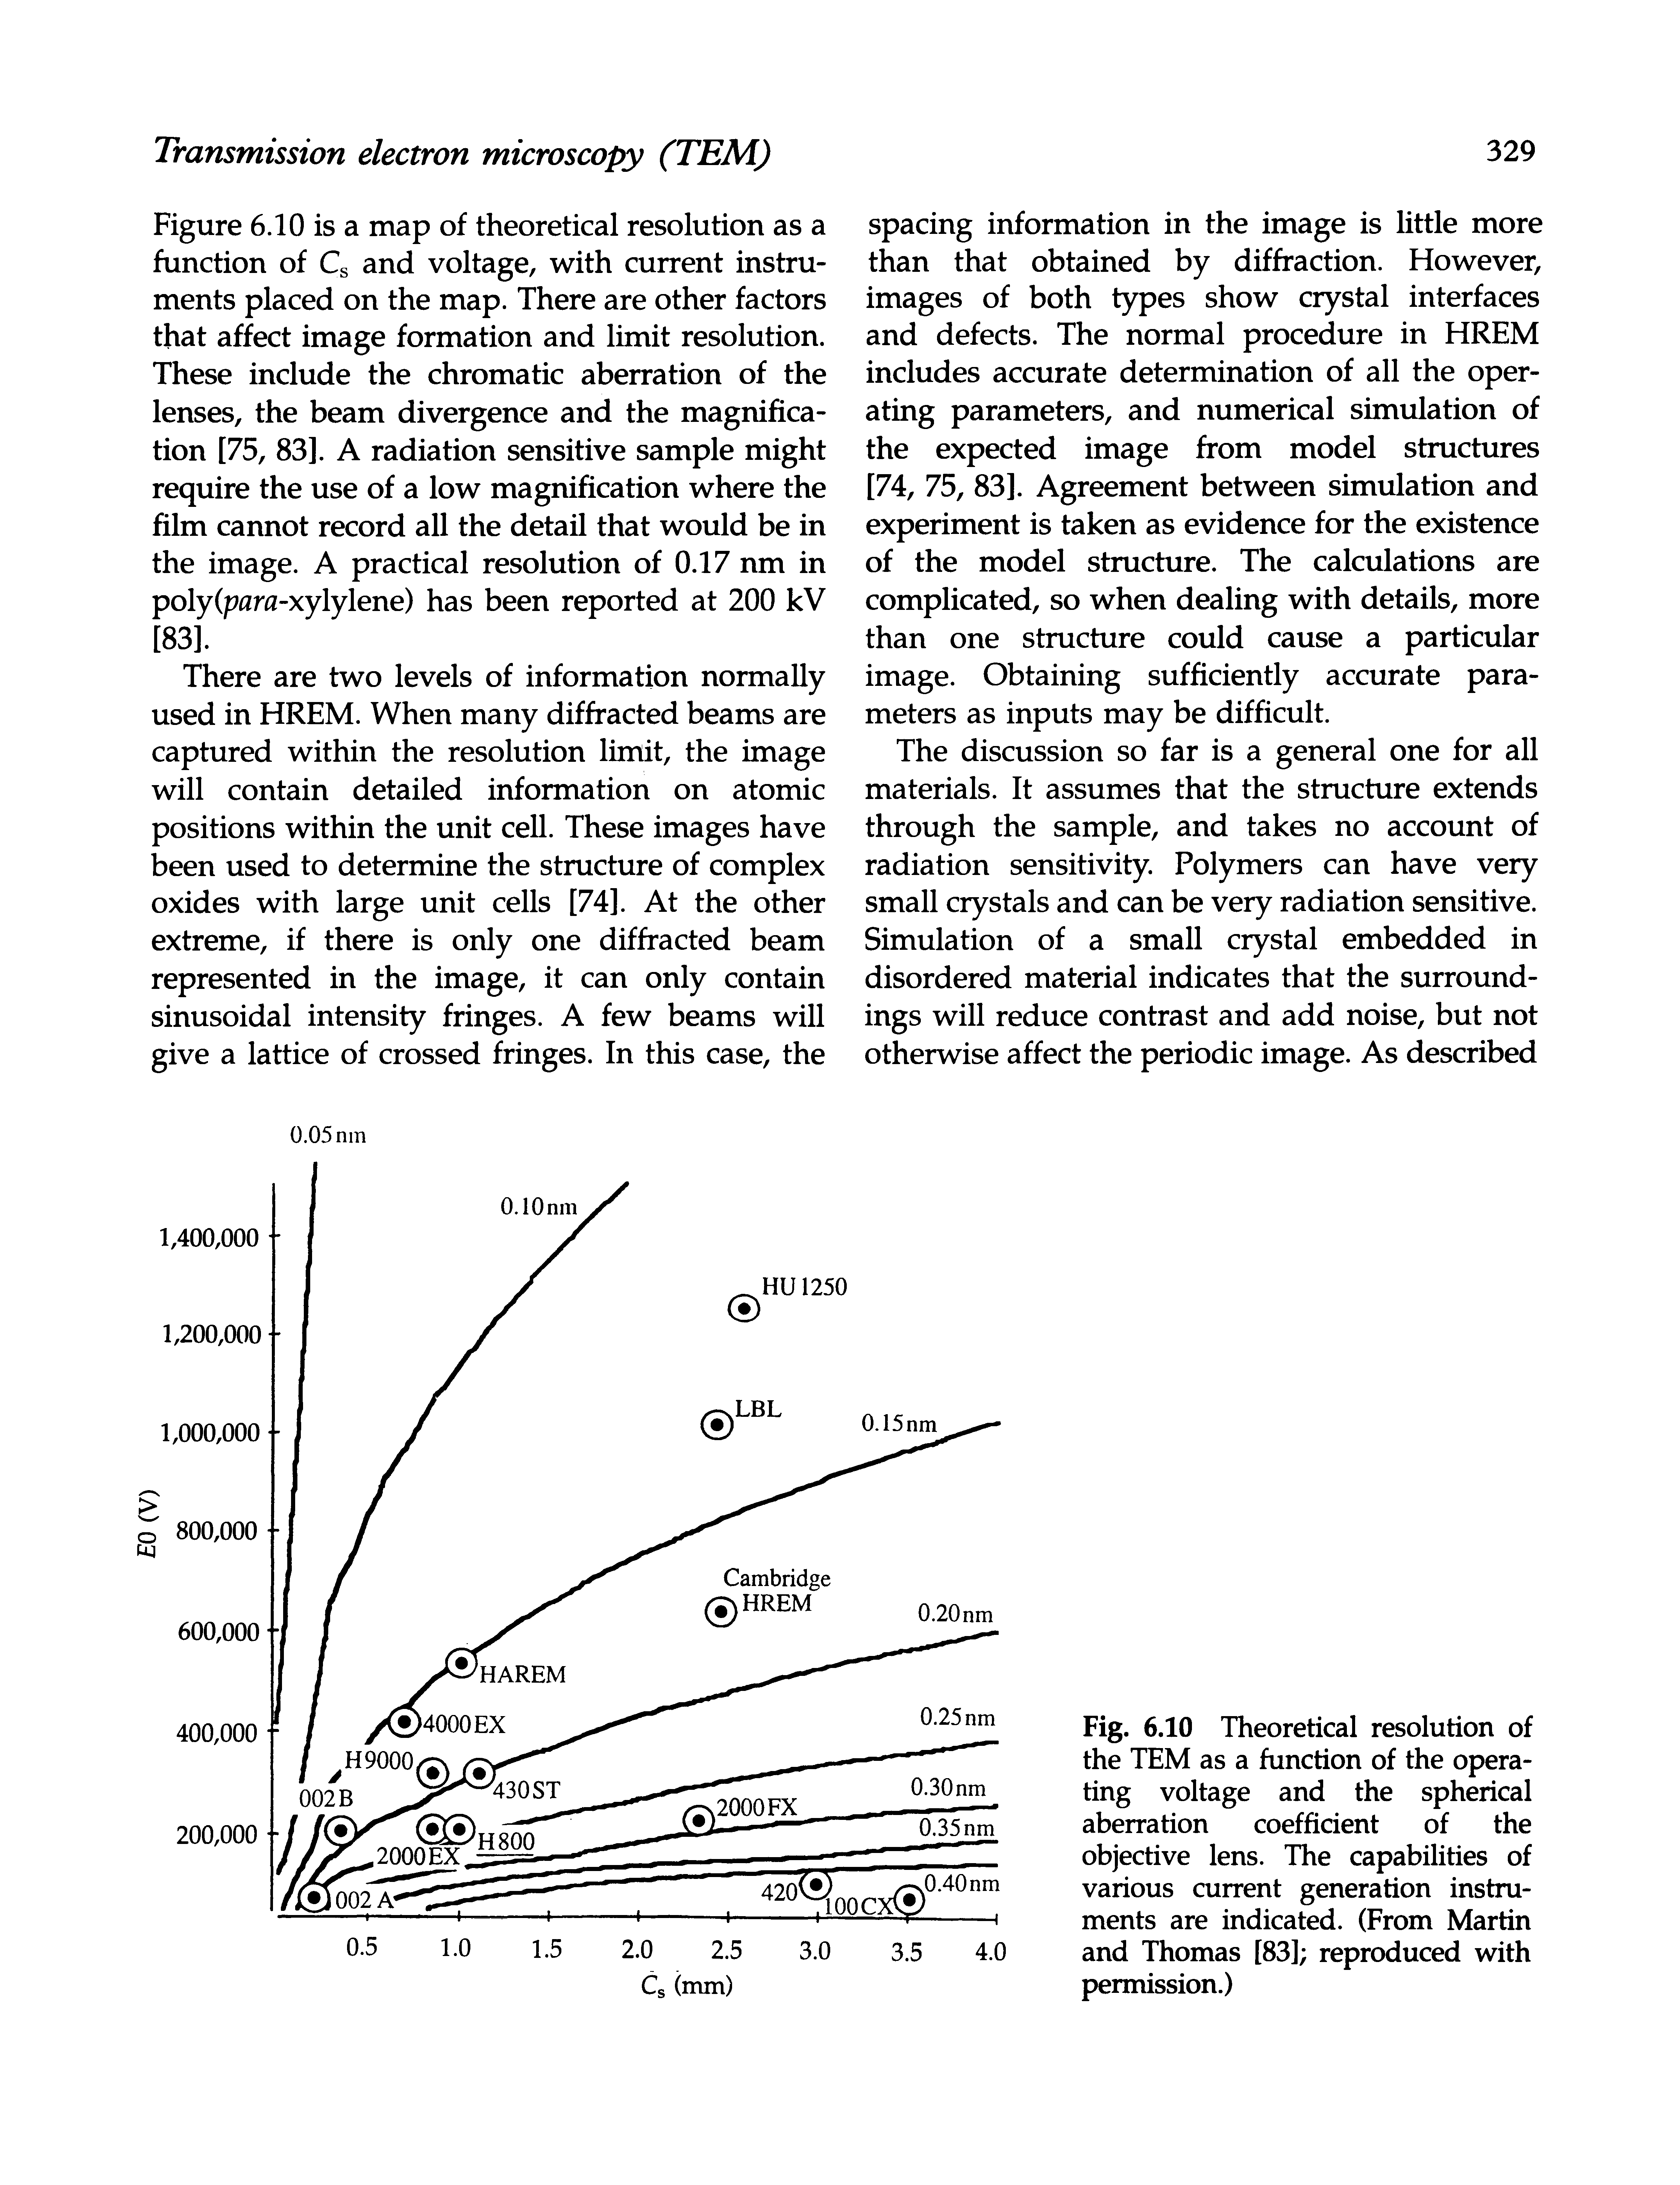 Fig. 6.10 Theoretical resolution of the TEM as a function of the operating voltage and the spherical aberration coefficient of the objective lens. The capabilities of various current generation instruments are indicated. (From Martin and Thomas [83] reproduced with permission.)...